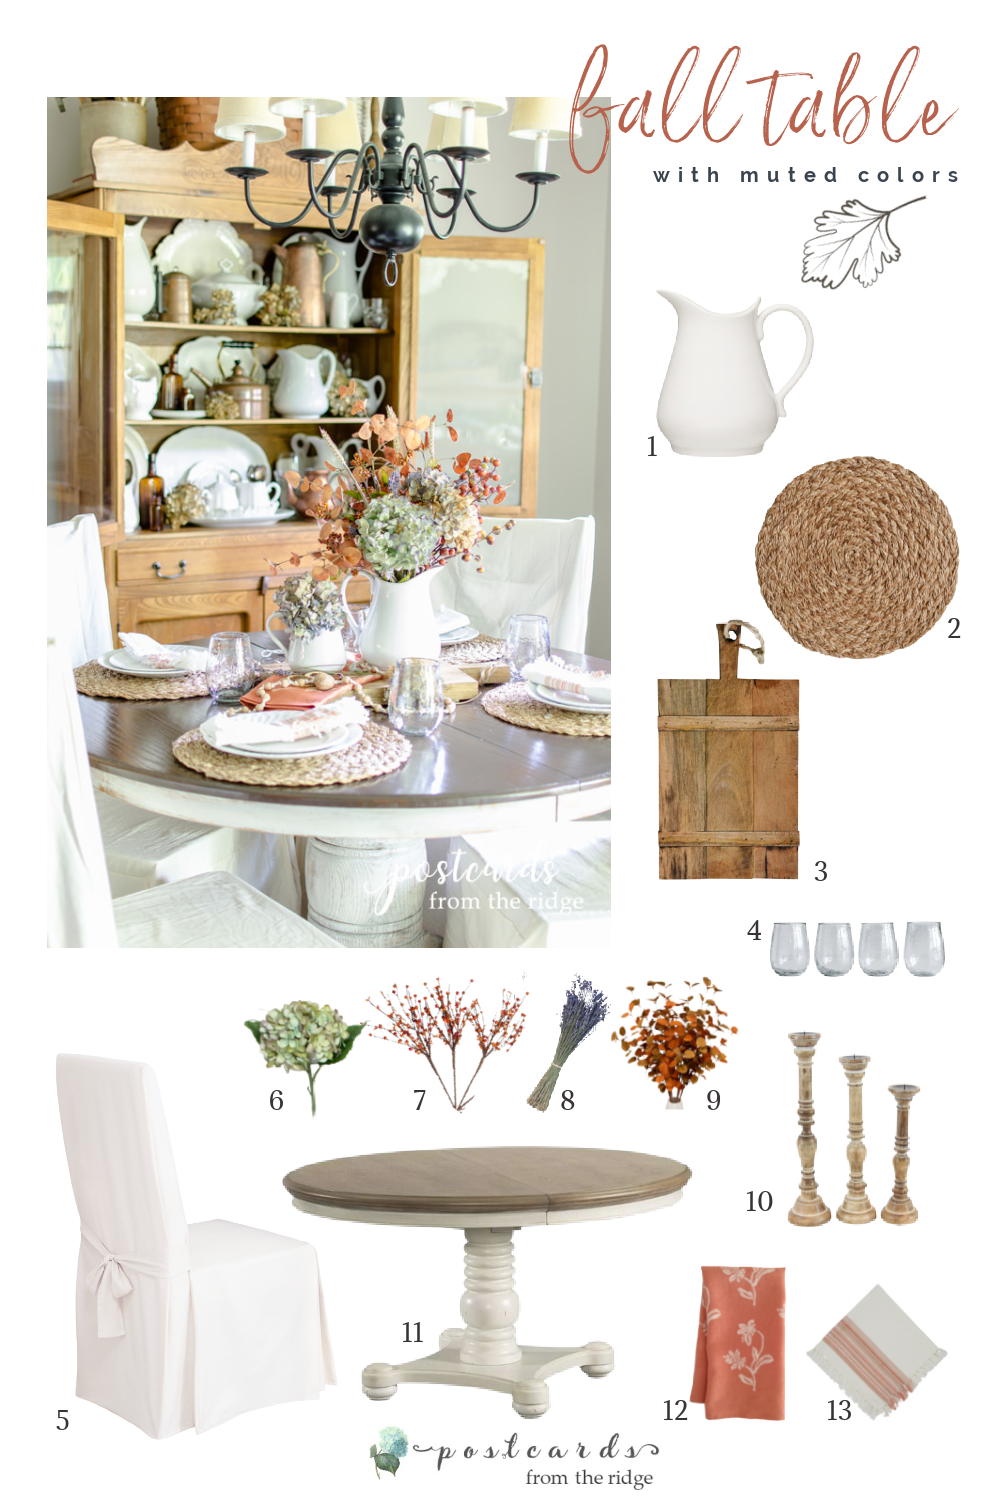 fall table with muted colors and subtle textures